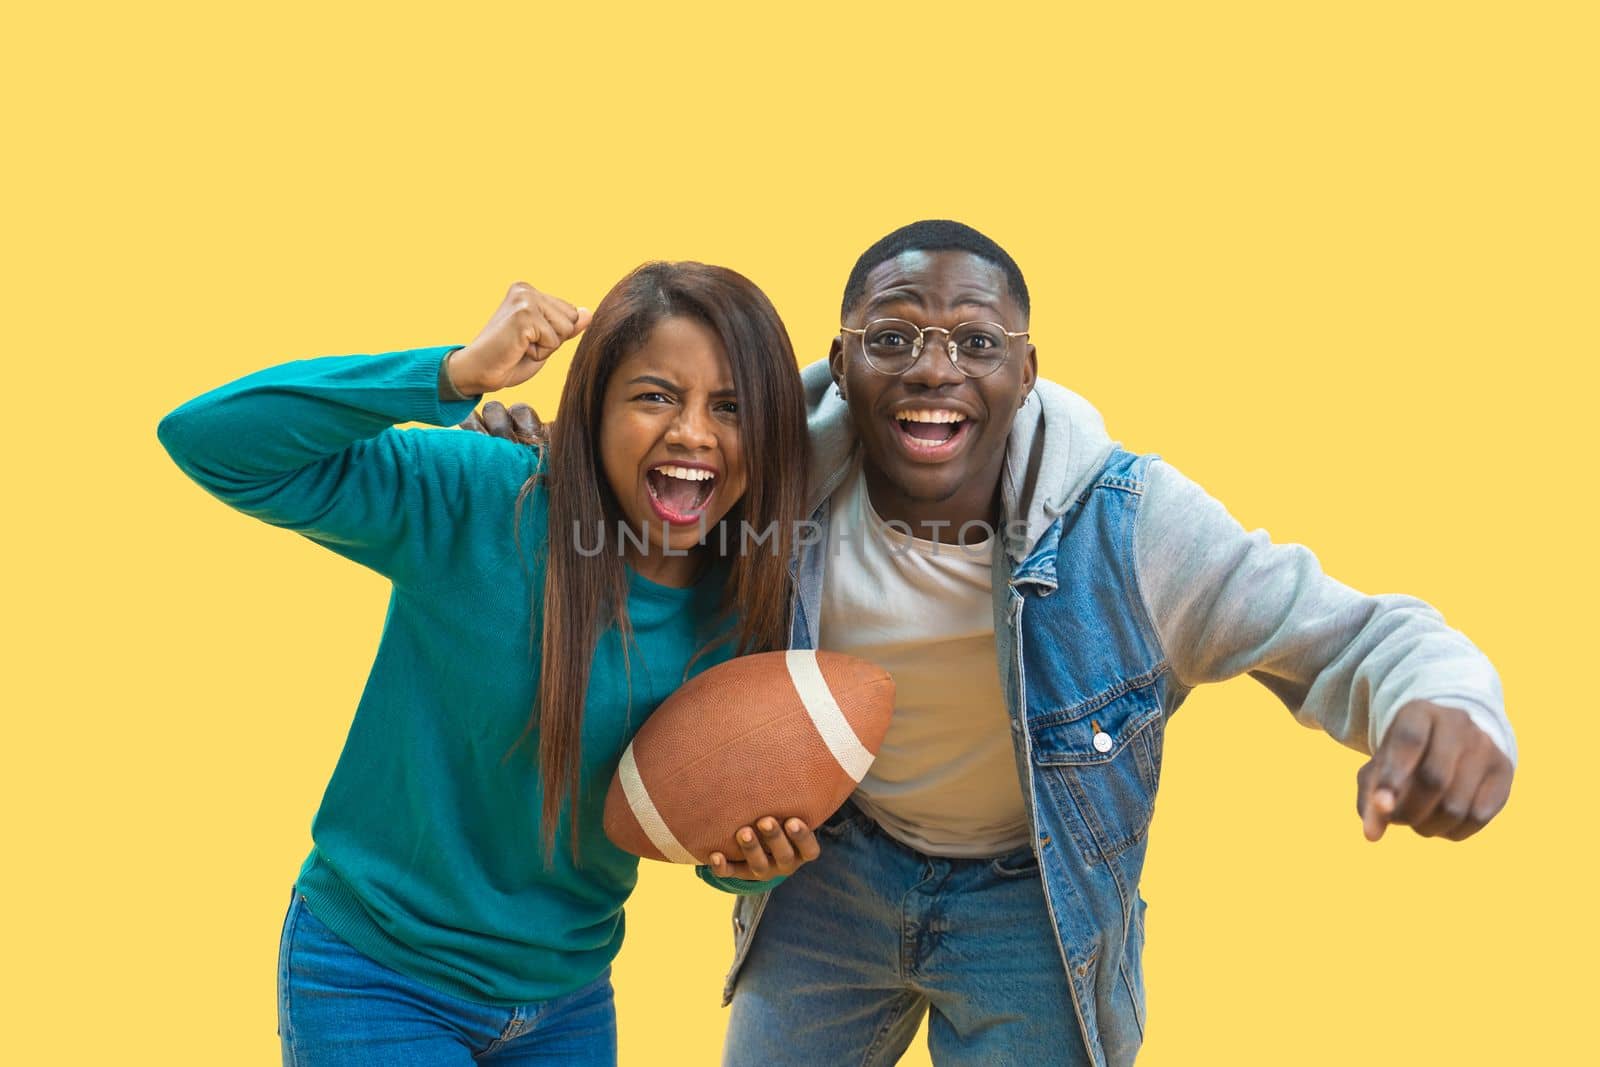 Excited ethnic diversity couple enjoying american football together isolated on yellow background by PaulCarr